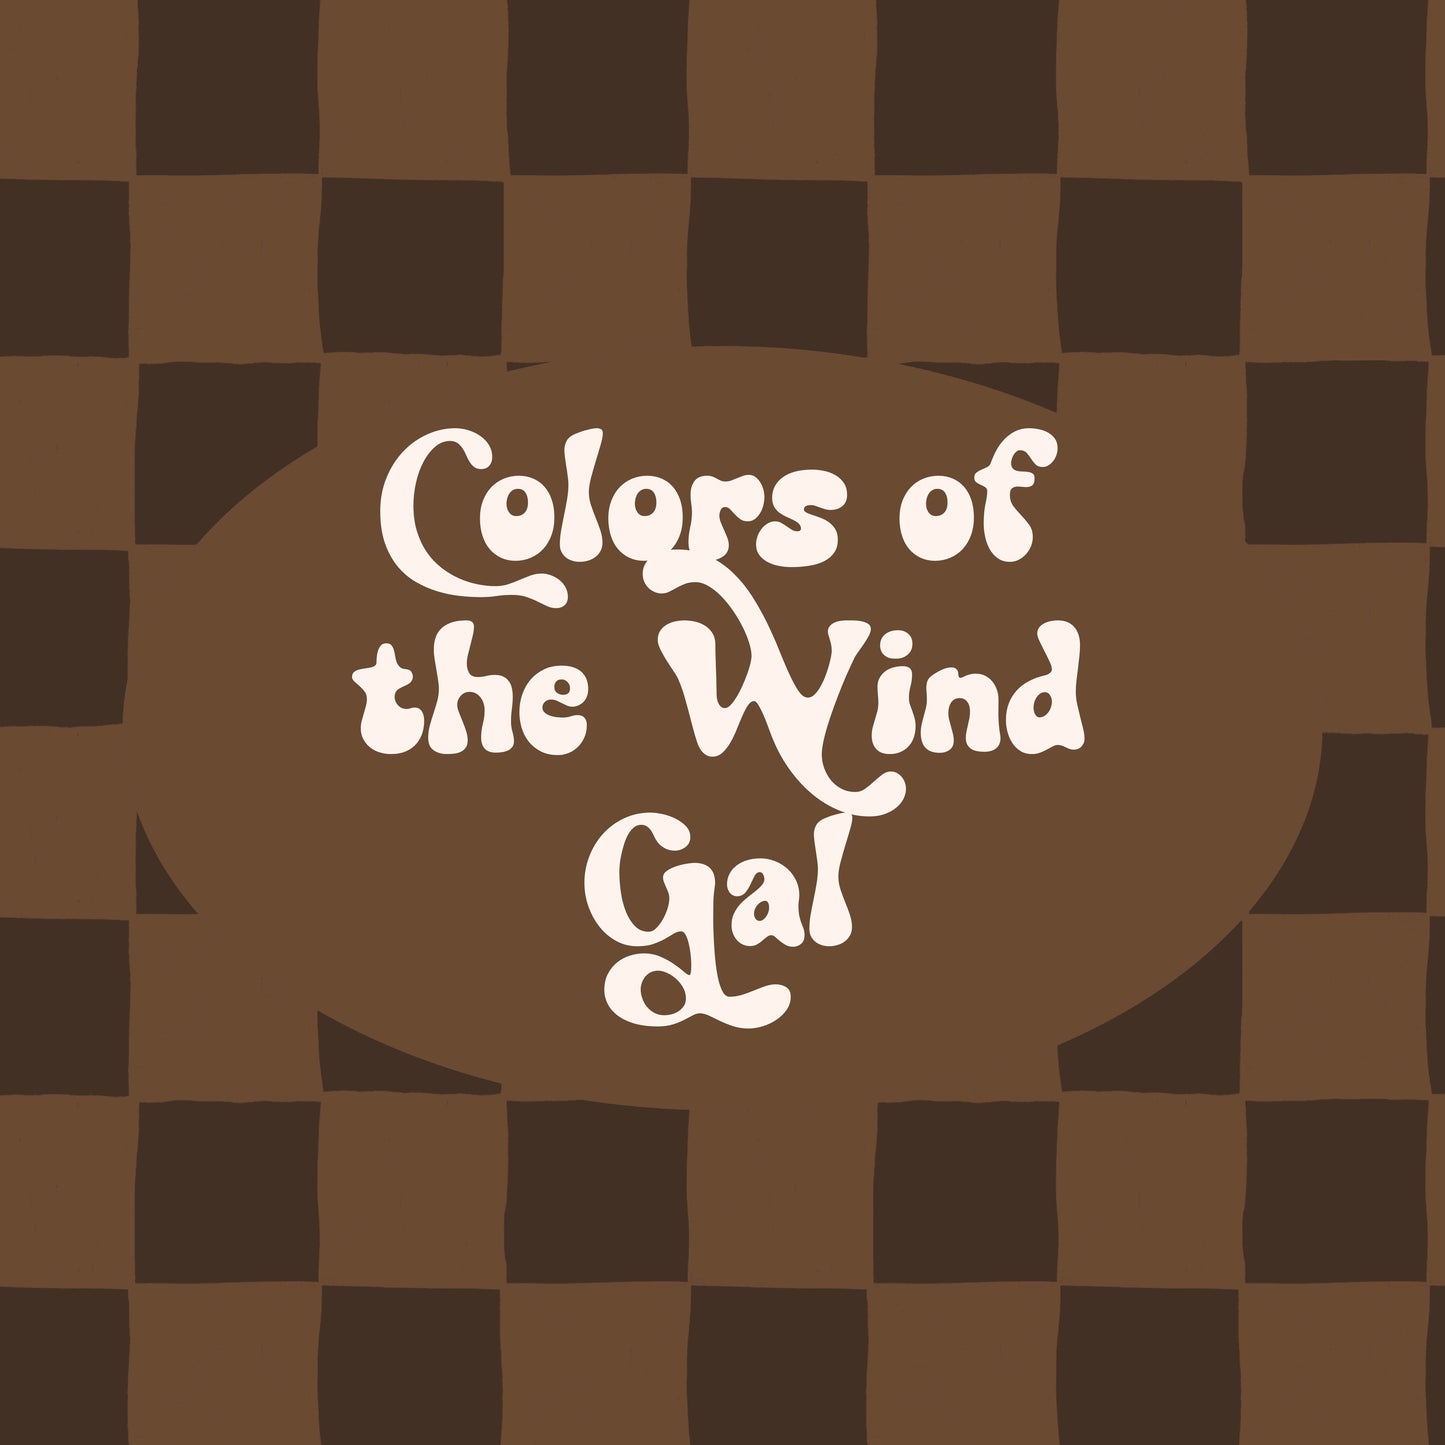 Colors of the Wind Gal